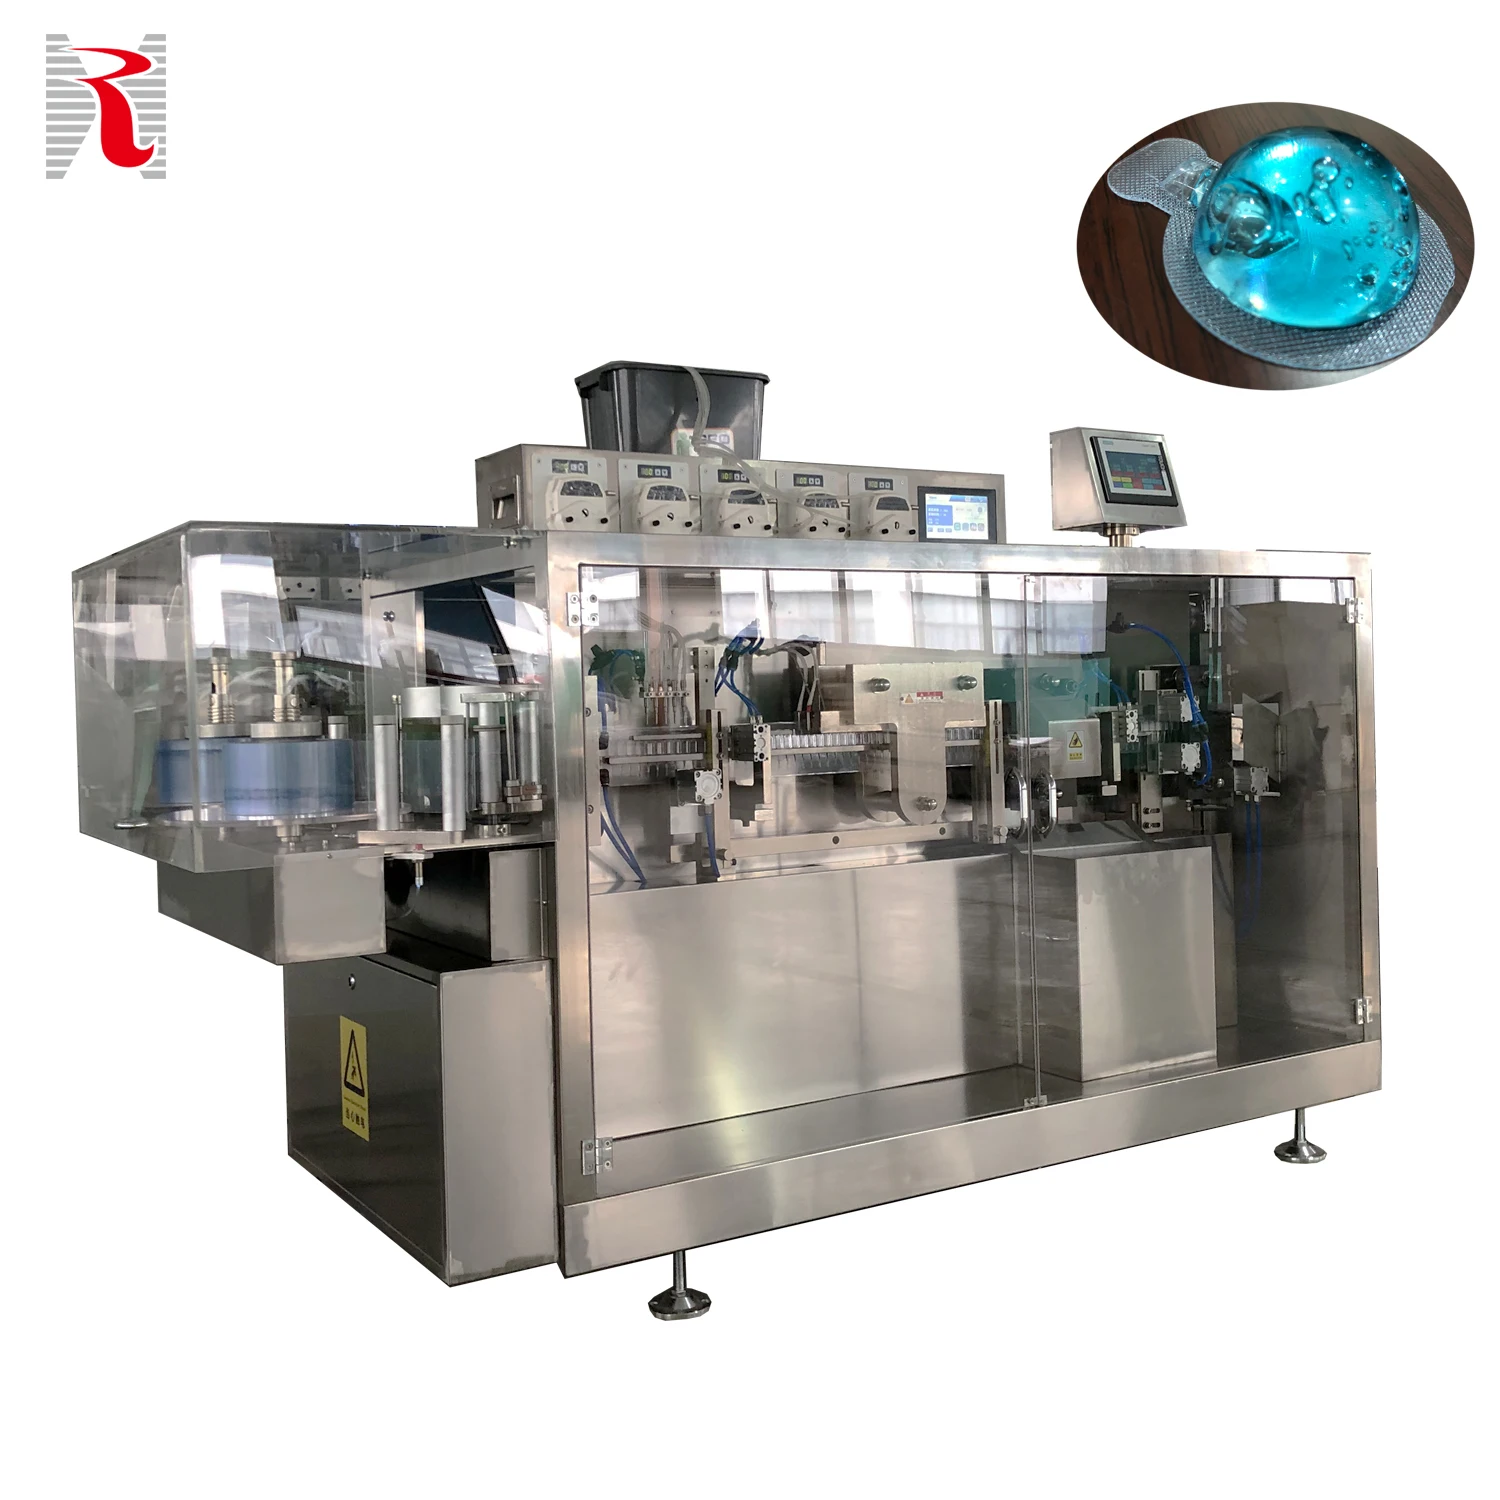 HOLS 118 Automatic 1 50ml Plastic Ampoule Making Filling Sealing Machine Low Temp For Comestic (1600276886884)